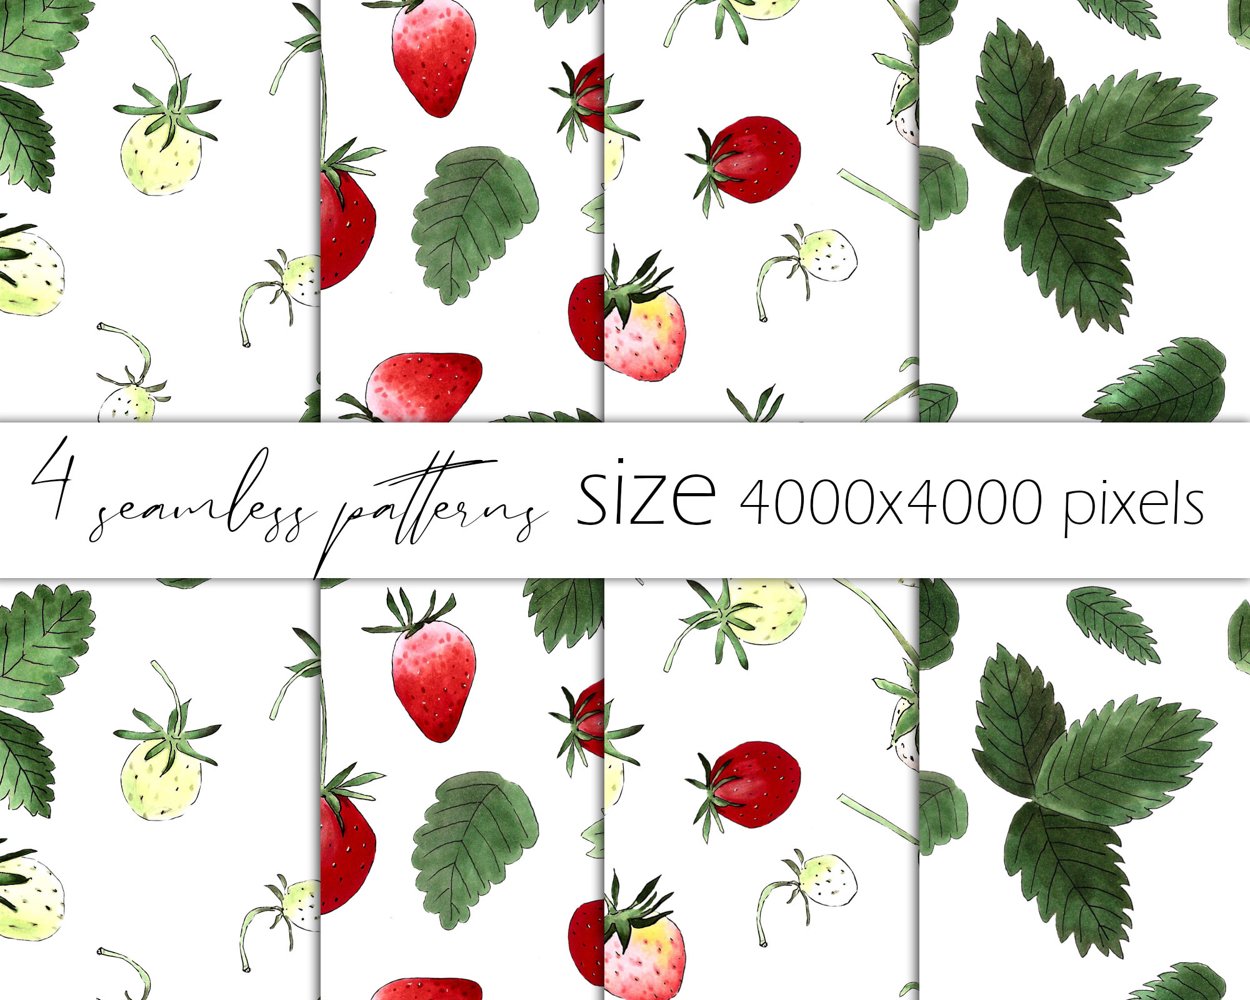 You will get 4 seamless patterns with strawberries.